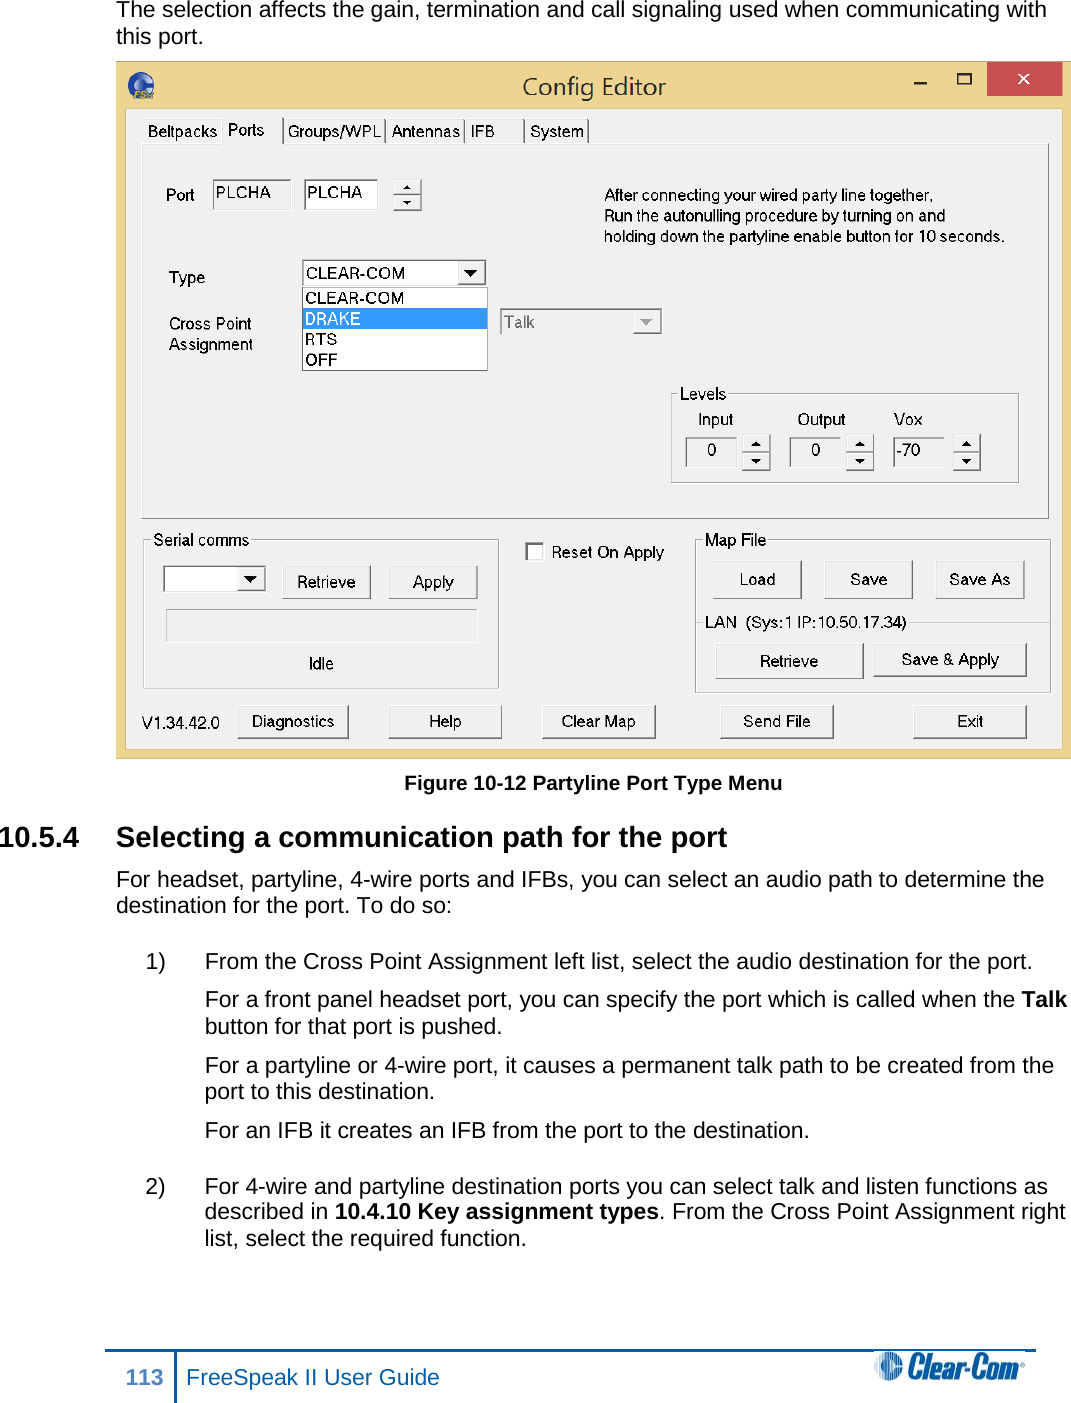 The selection affects the gain, termination and call signaling used when communicating with this port.  Figure 10-12 Partyline Port Type Menu 10.5.4 Selecting a communication path for the port For headset, partyline, 4-wire ports and IFBs, you can select an audio path to determine the destination for the port. To do so: 1) From the Cross Point Assignment left list, select the audio destination for the port. For a front panel headset port, you can specify the port which is called when the Talk button for that port is pushed. For a partyline or 4-wire port, it causes a permanent talk path to be created from the port to this destination. For an IFB it creates an IFB from the port to the destination. 2) For 4-wire and partyline destination ports you can select talk and listen functions as described in 10.4.10 Key assignment types. From the Cross Point Assignment right list, select the required function. 113 FreeSpeak II User Guide  